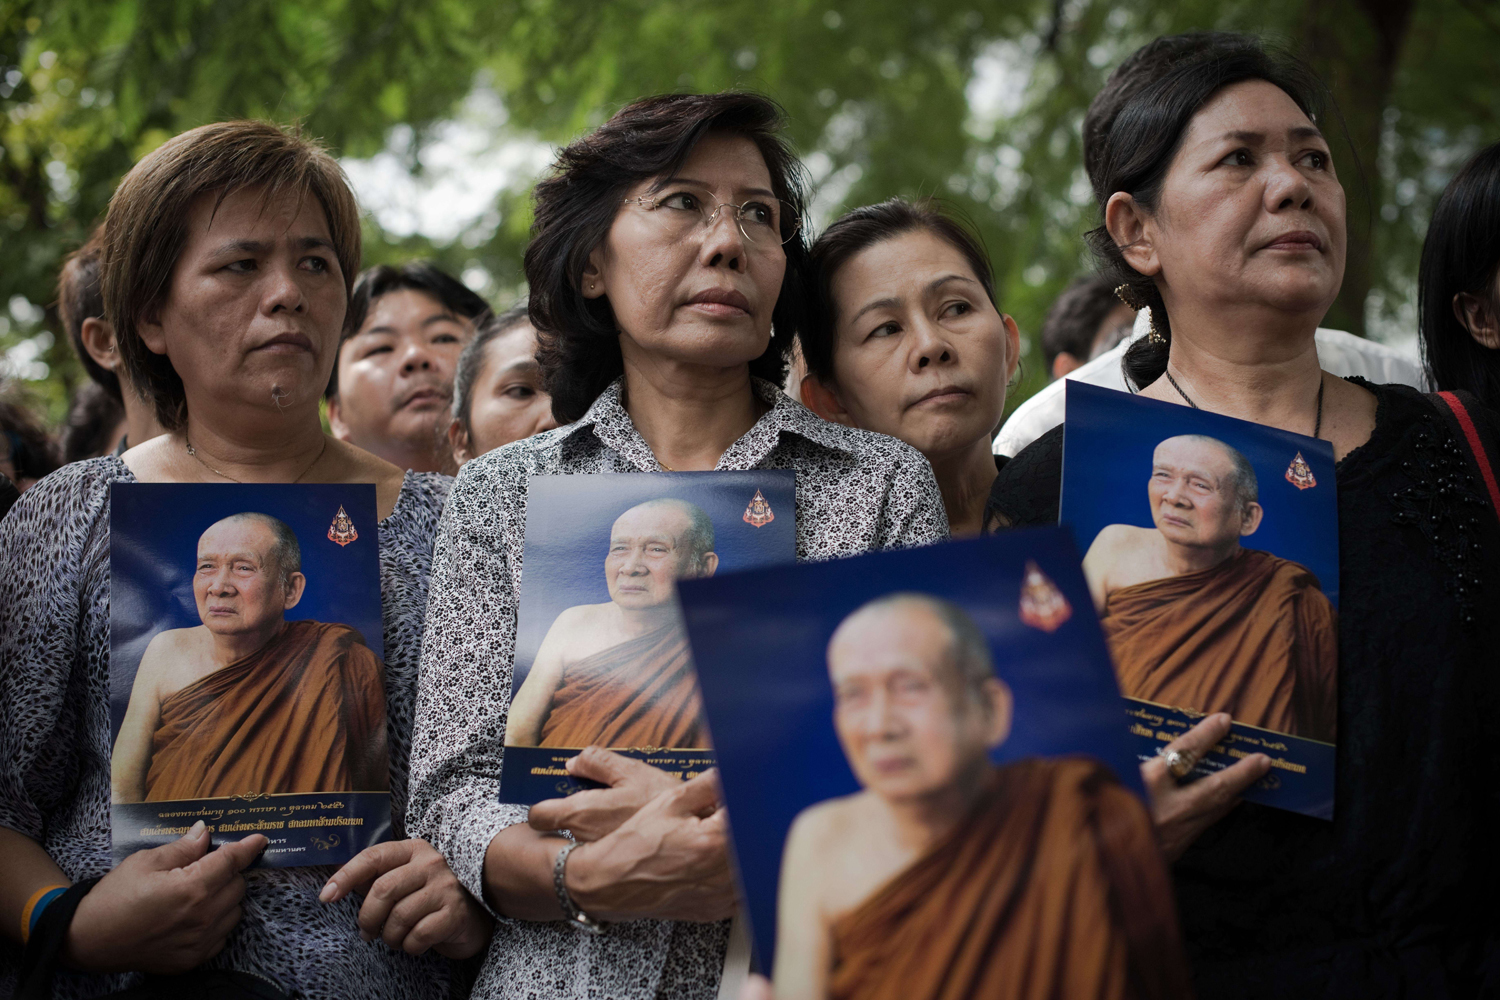 Oct. 25, 2013. Thai women hold a portrait of Thai Supreme Patriarch Somdet Phra Nyanasamvara, Thailand's top Buddhist leader who died at the age of 100, outside the Chulalongkorn hospital, in Bangkok.